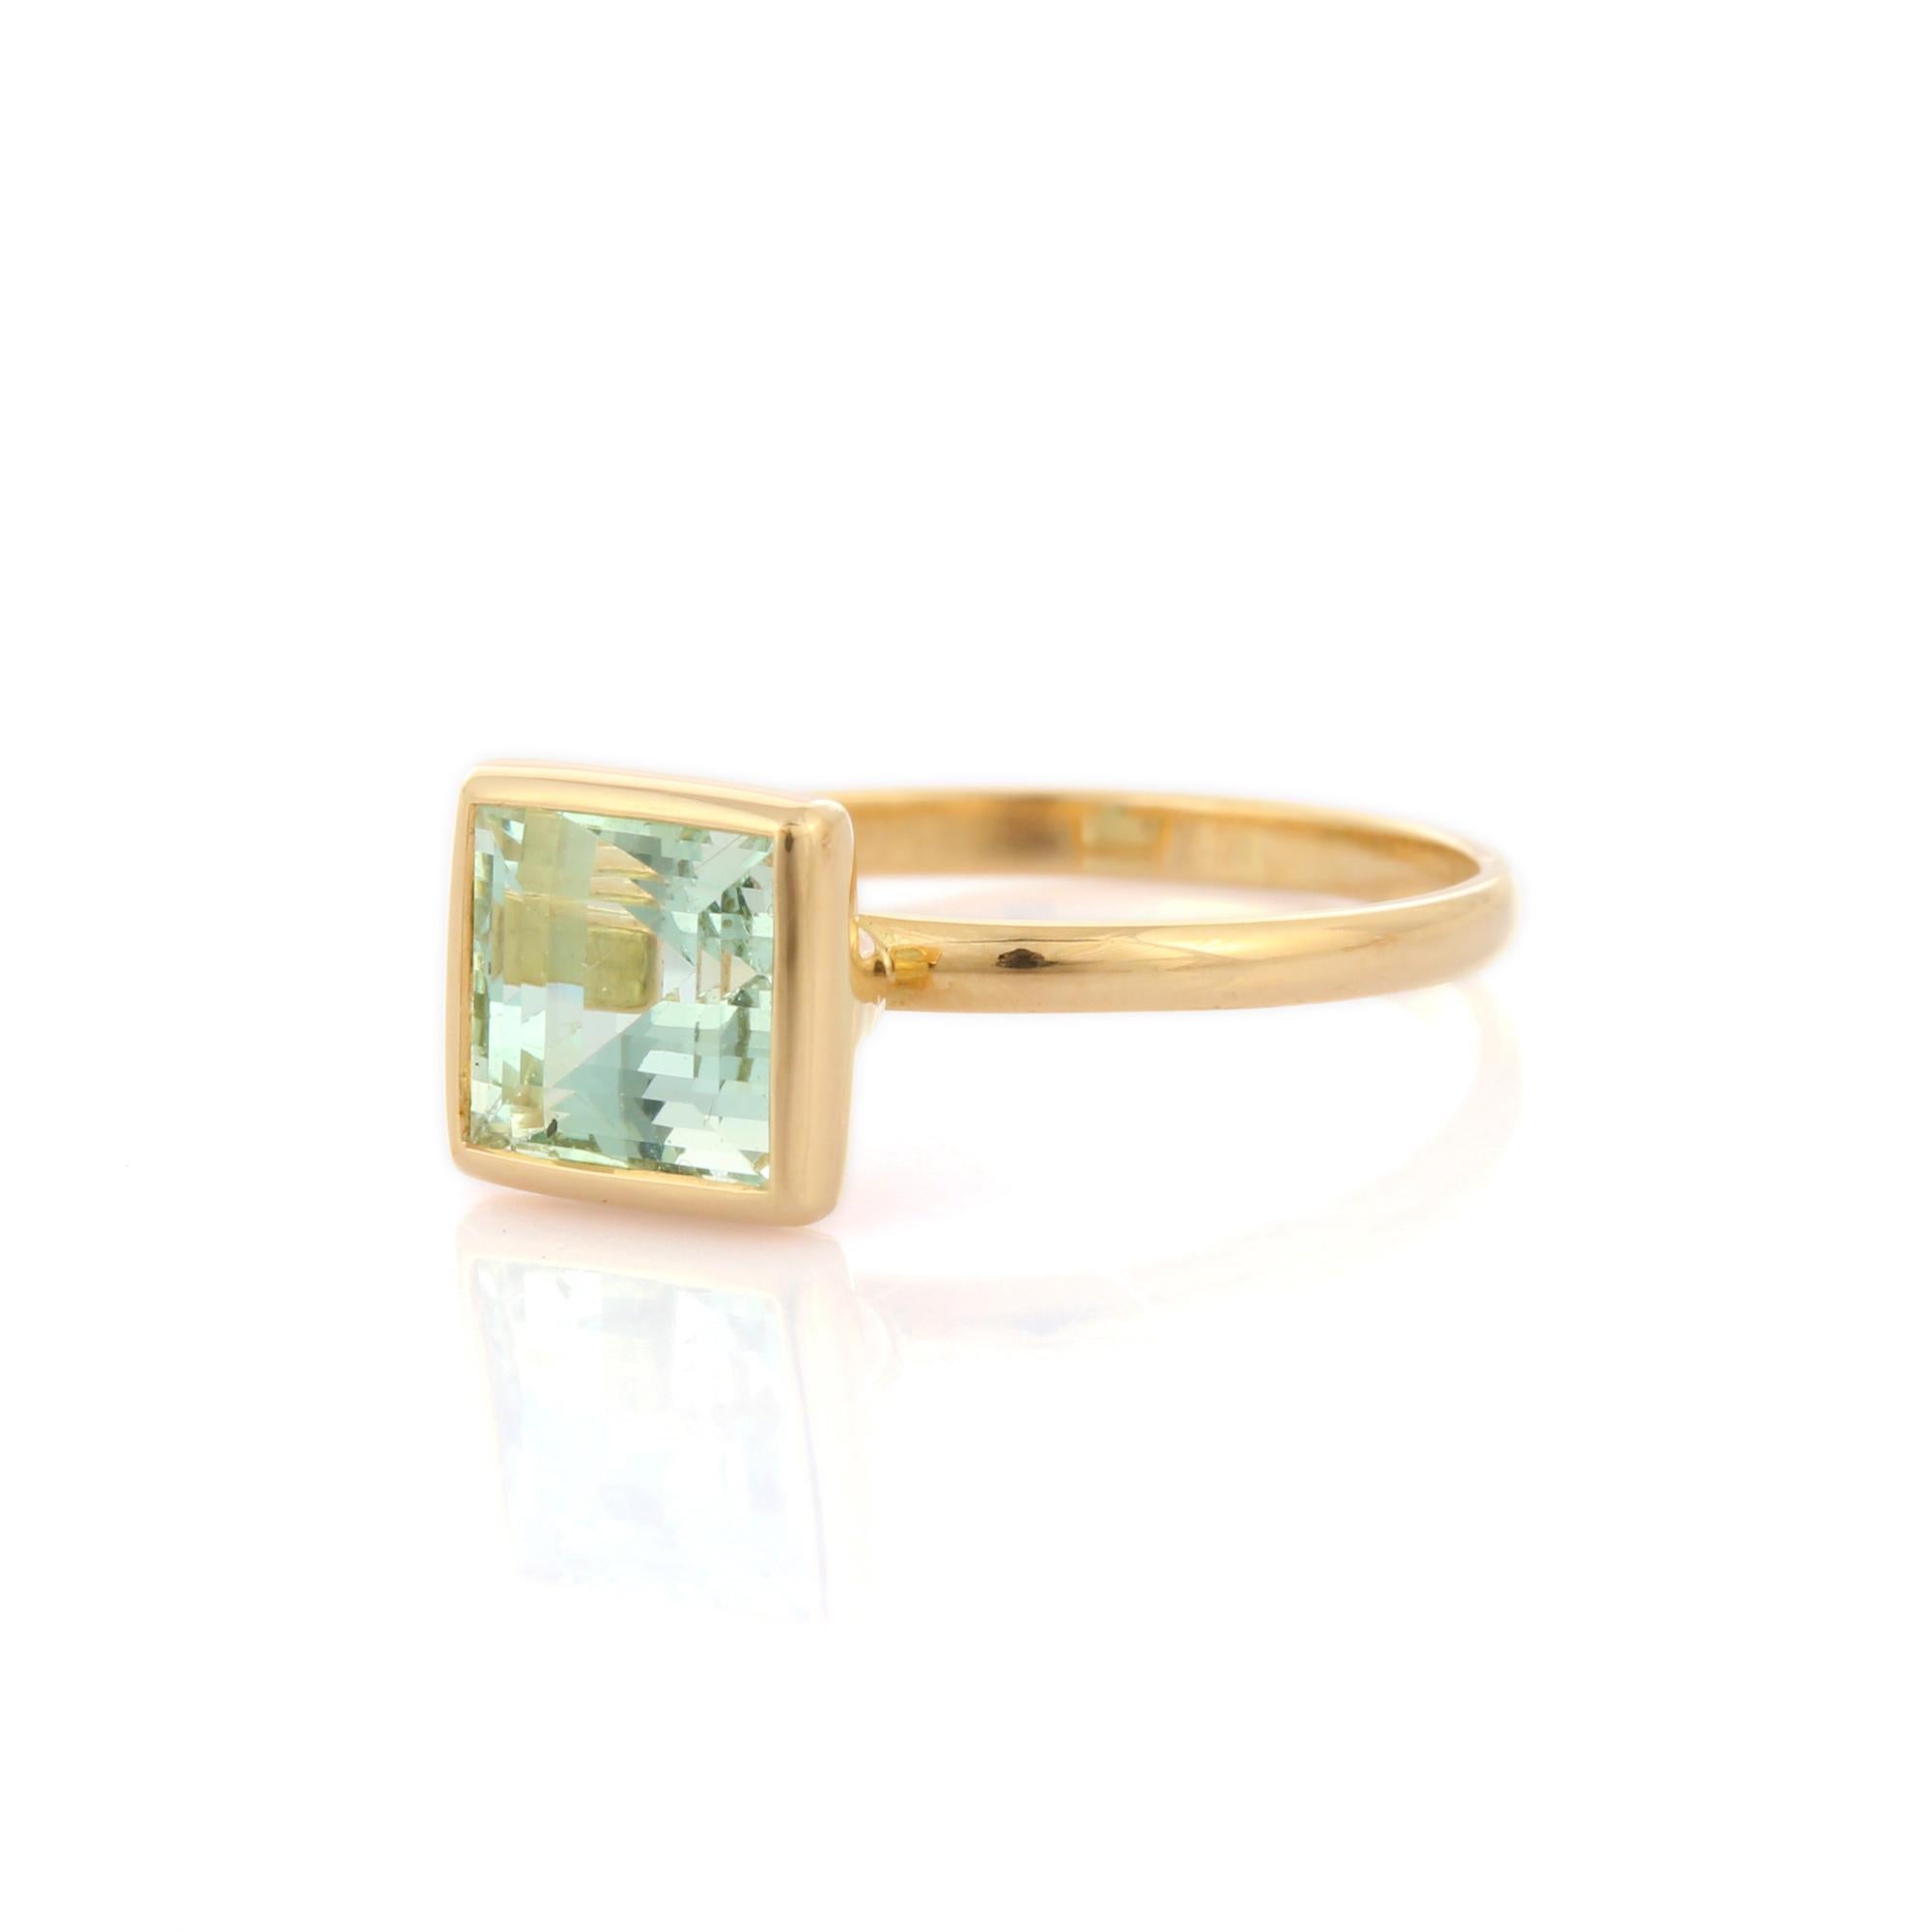 For Sale:  Natural Aquamarine Square Cut Gemstone Ring in 18K Yellow Gold 5